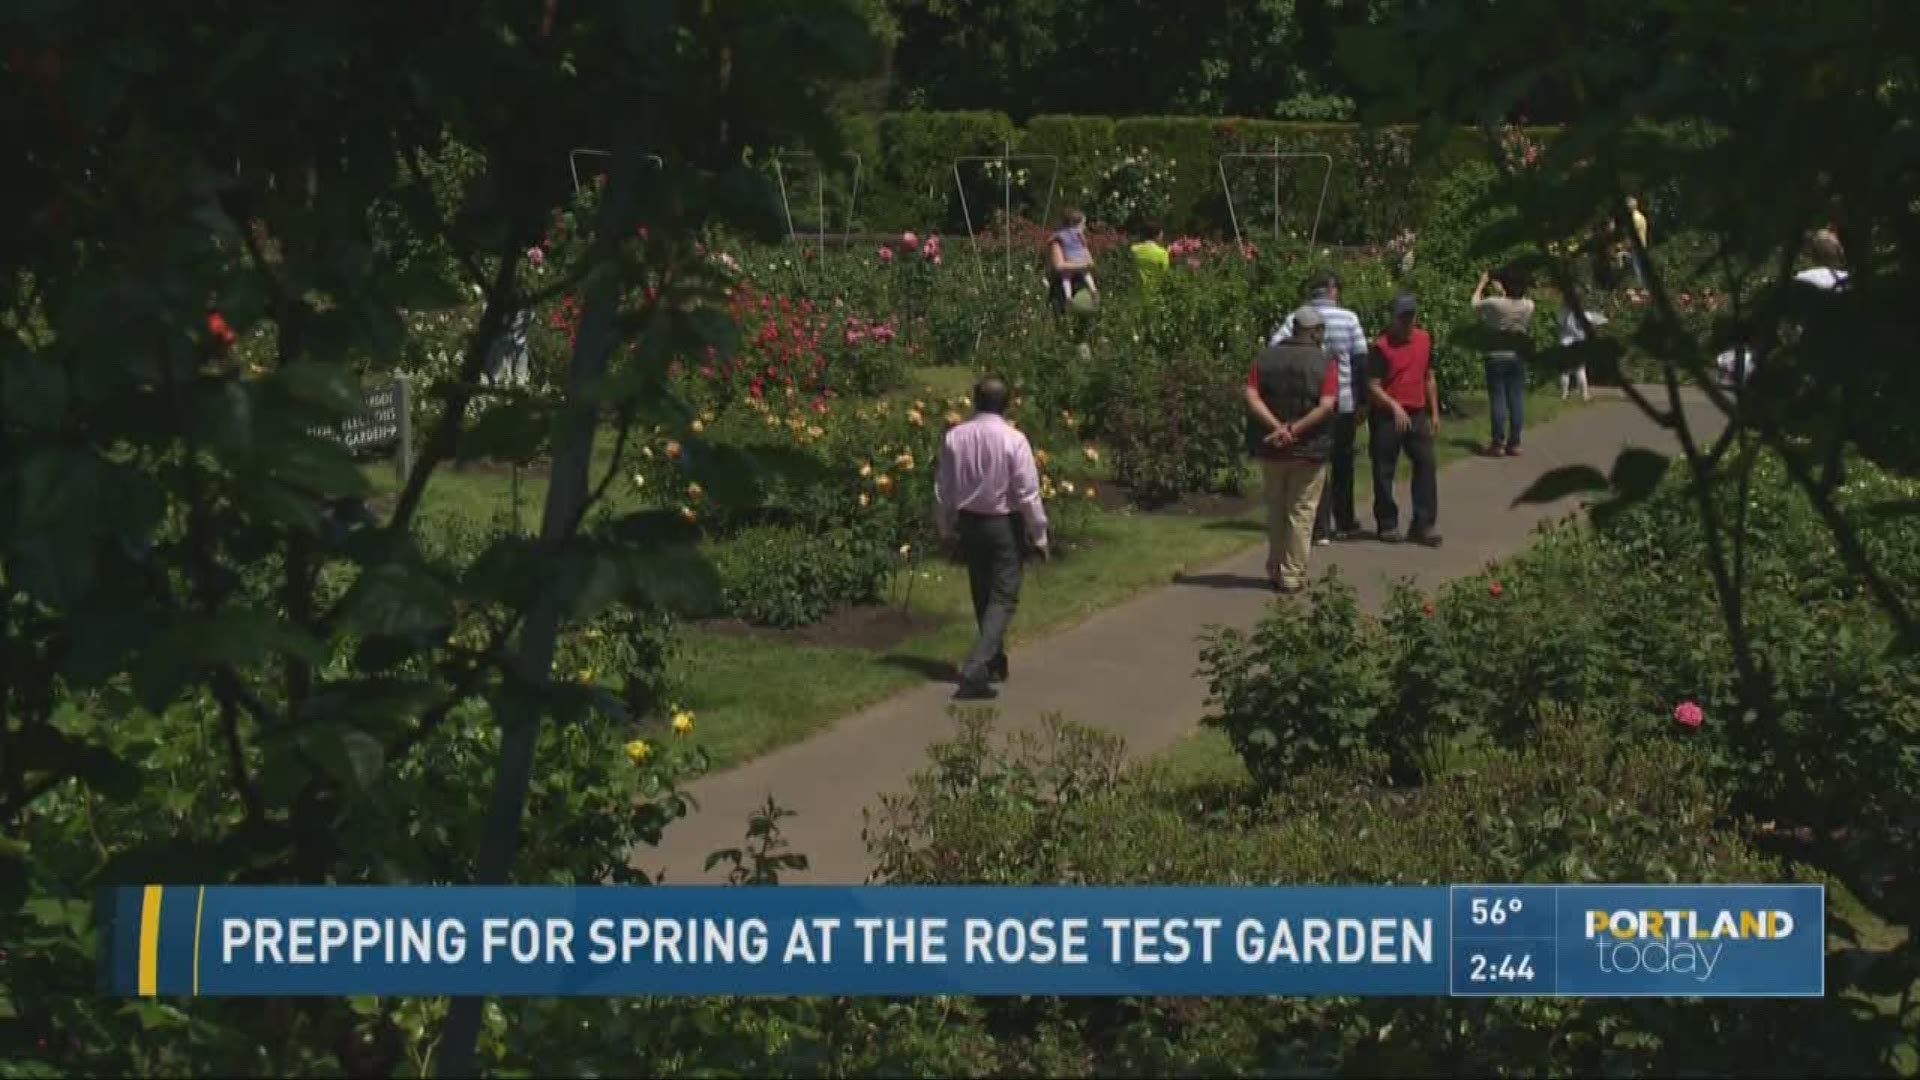 Cathy Marshall was live at the Rose Garden in Washington Park.